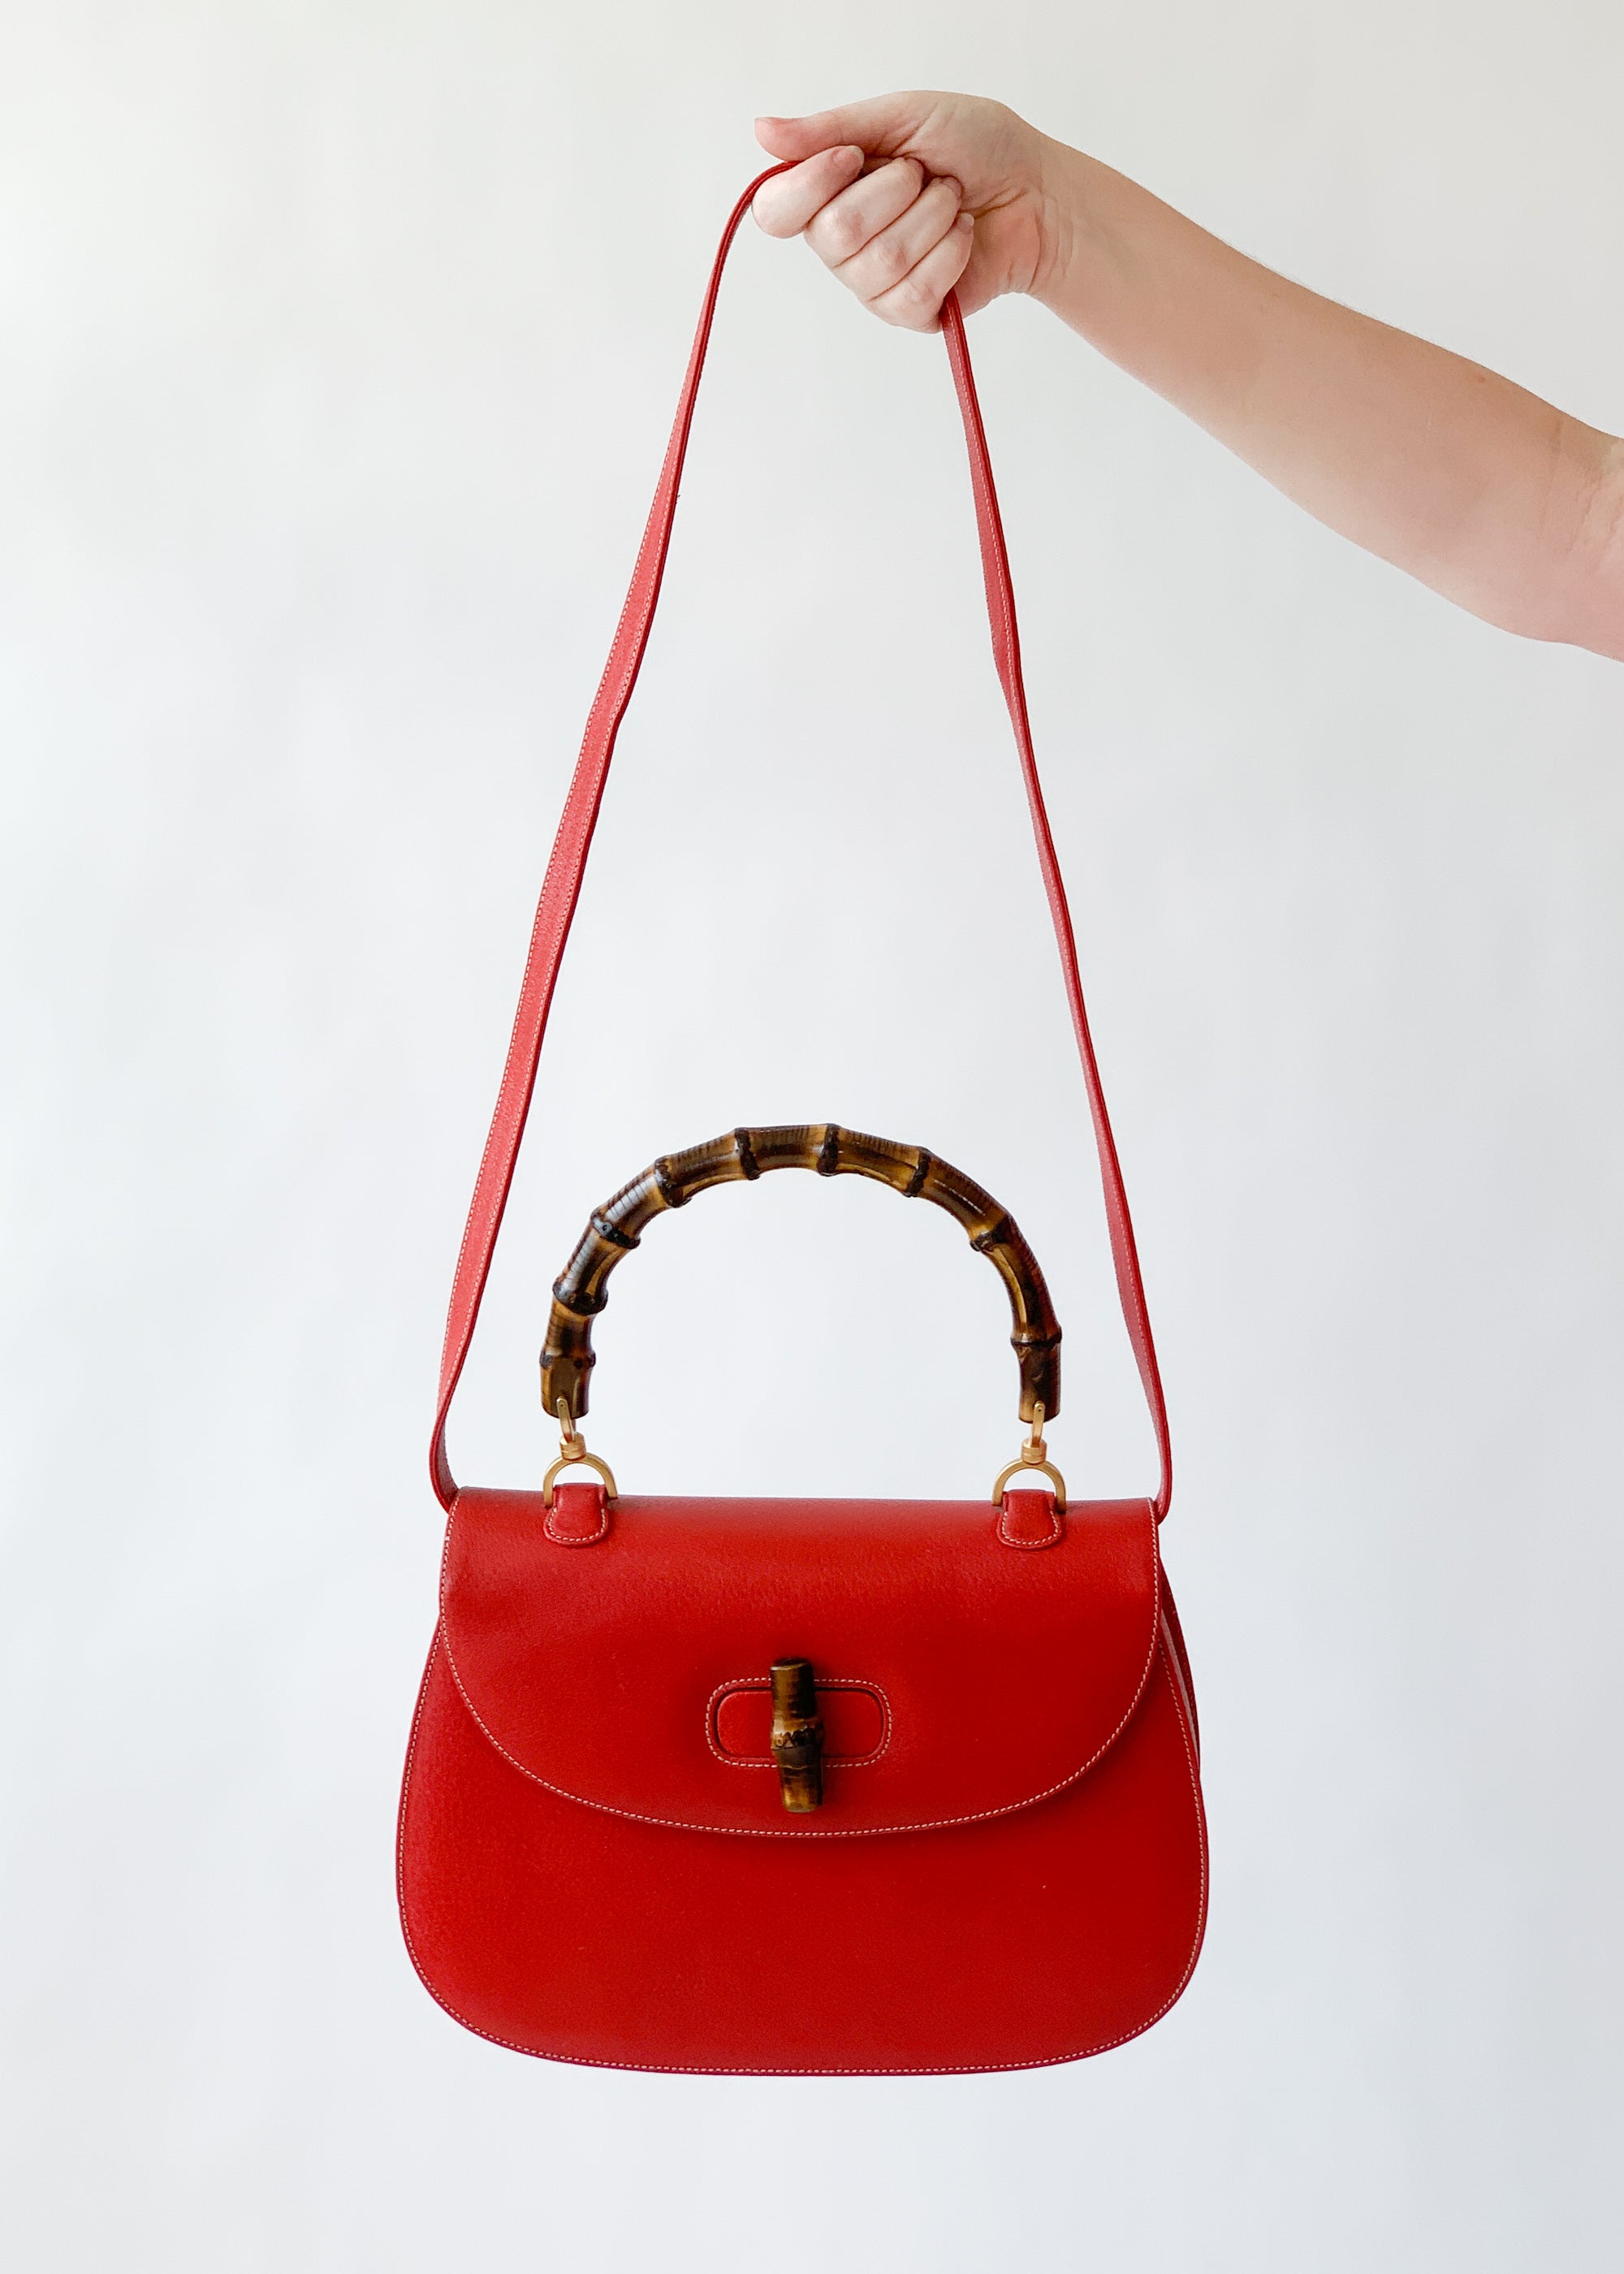 Vintage Early 1990s Red Gucci Bamboo Handle Bag with Strap